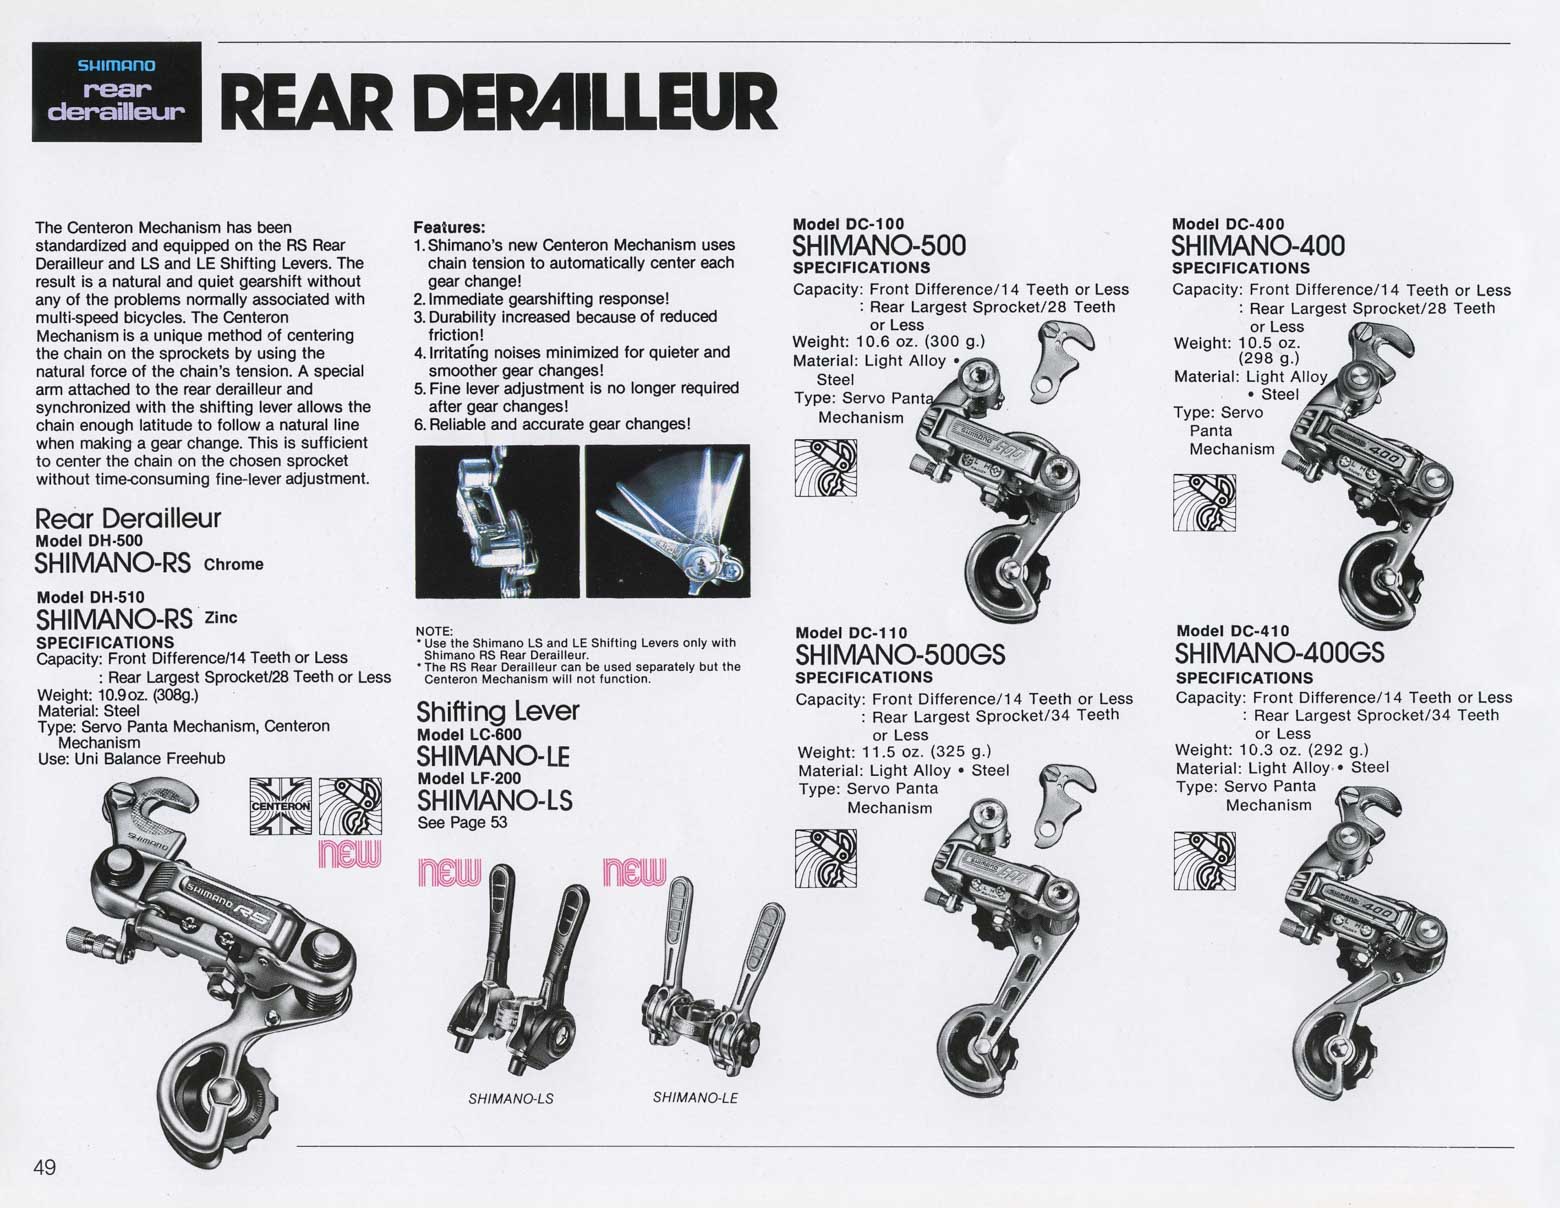 Shimano Bicycle System Components (December 1978) page 49 main image